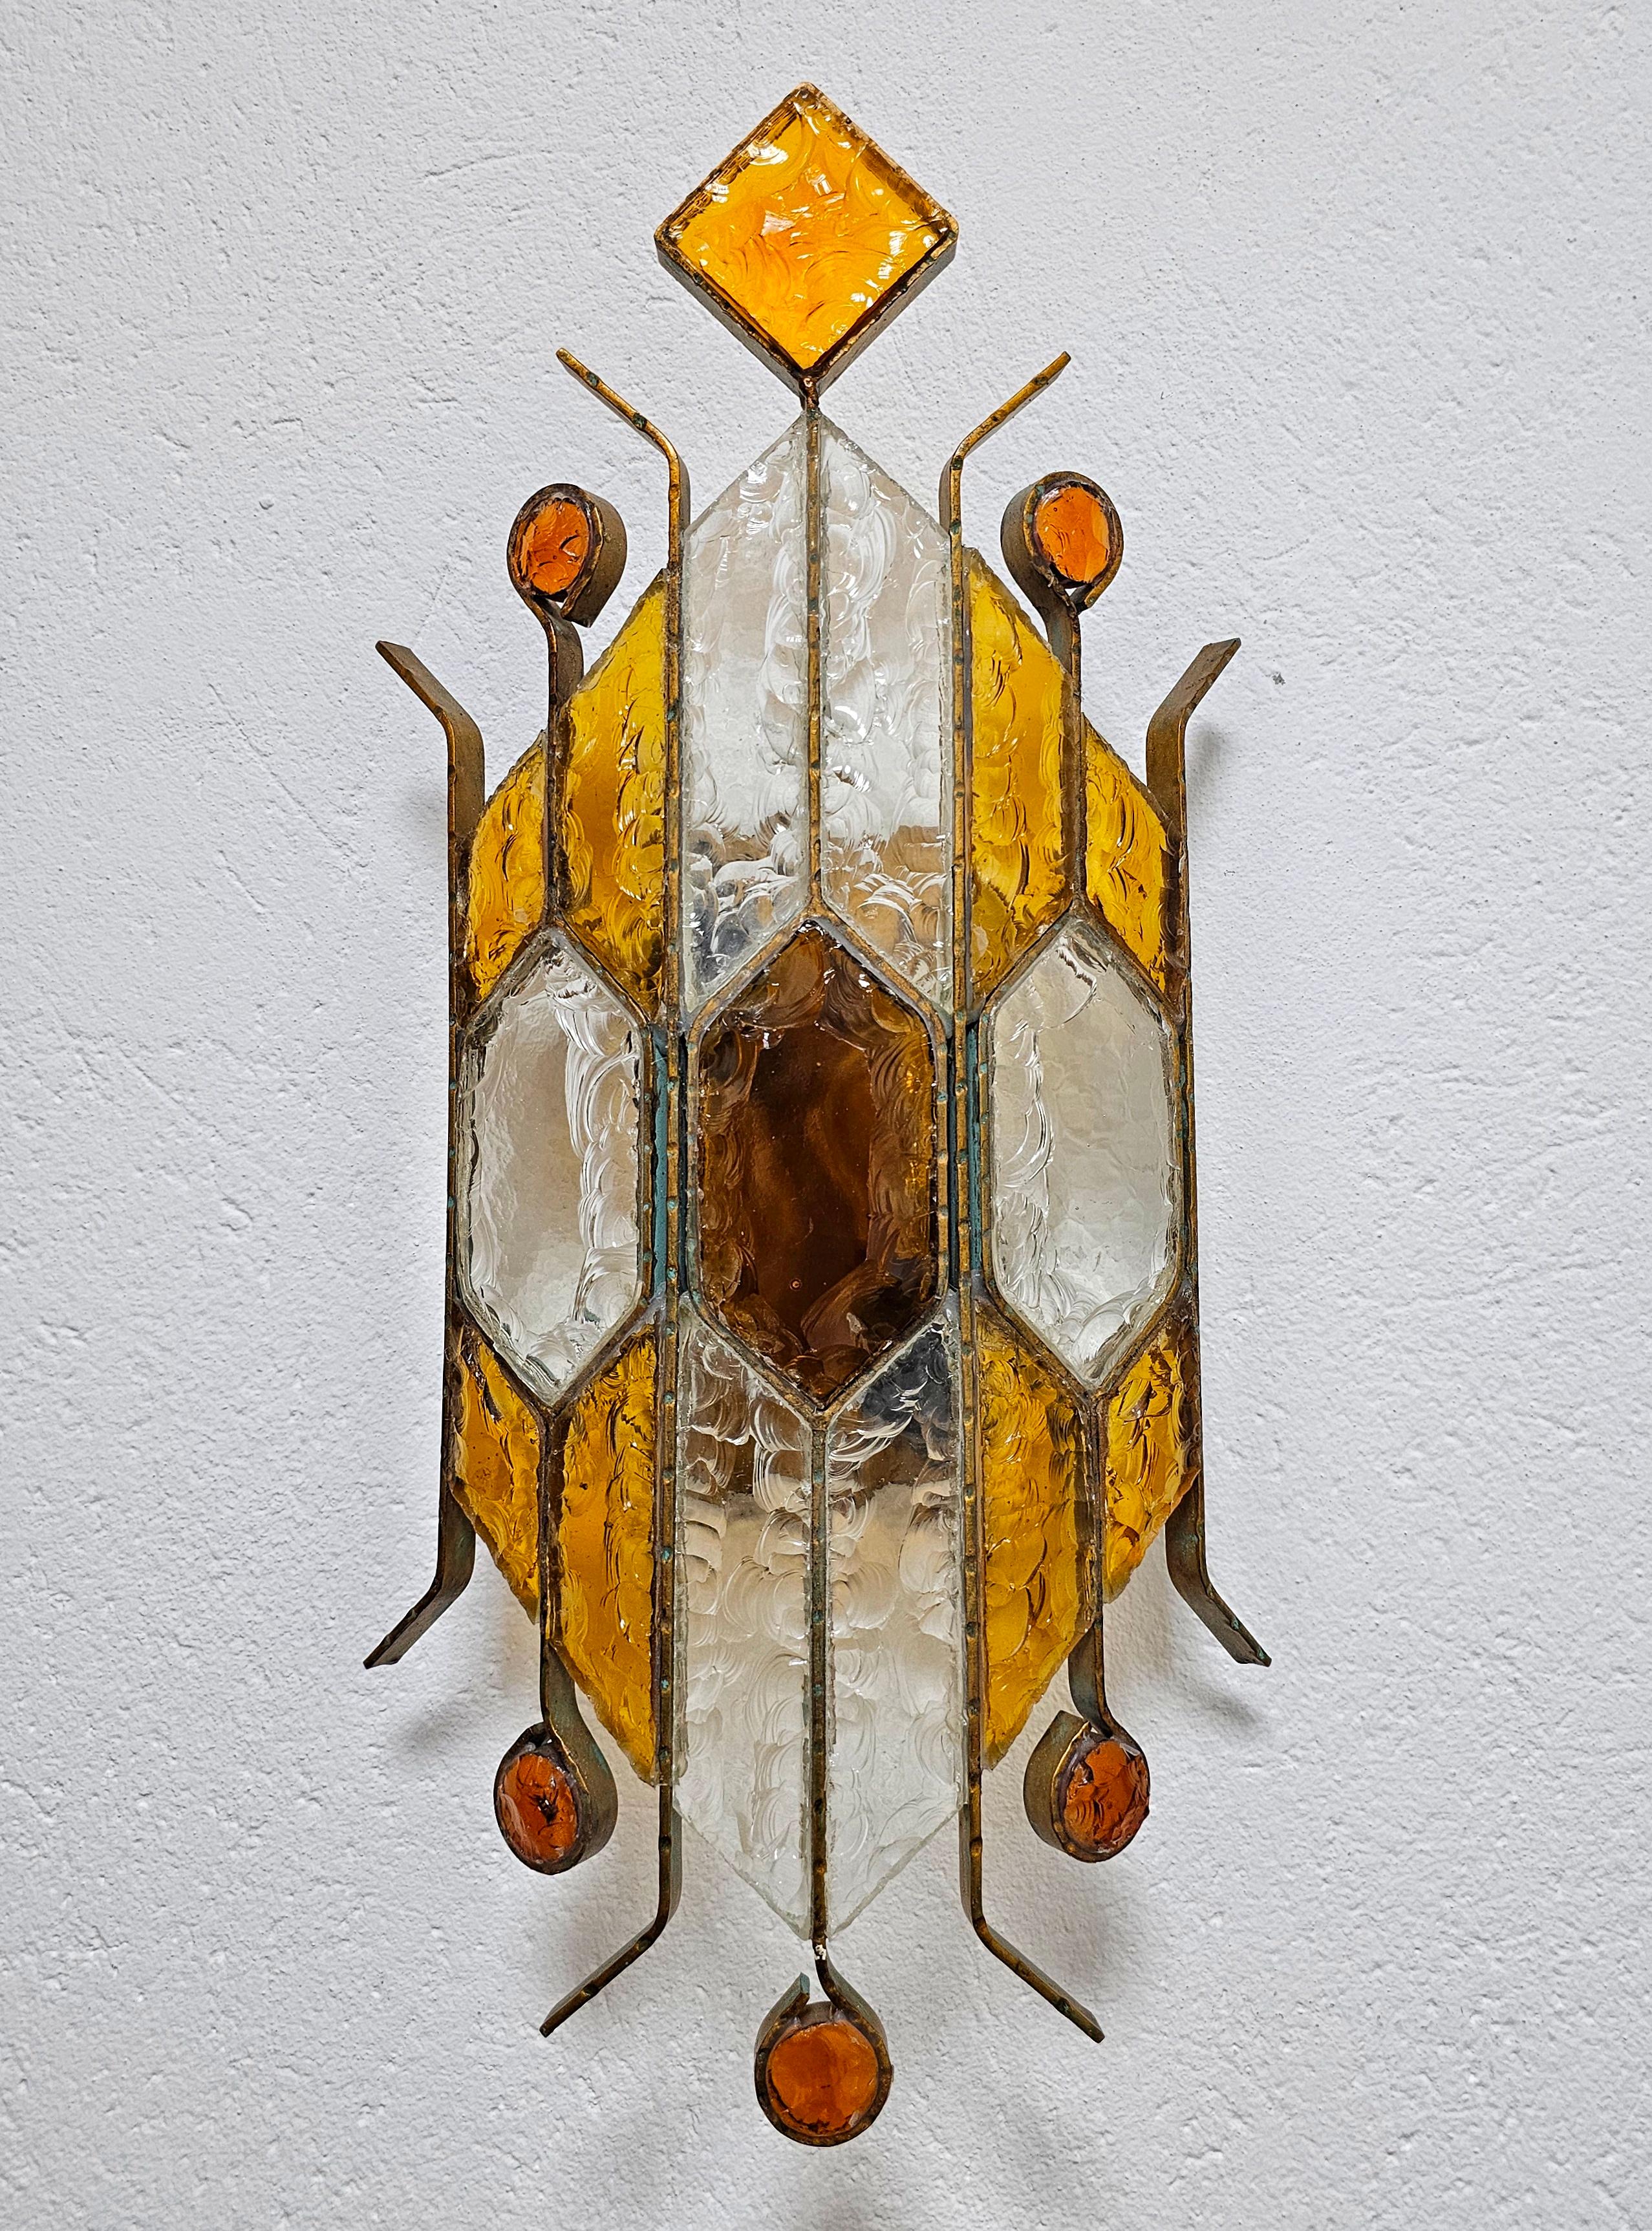 In this listing you will find a spectacular and large Brutalist sconce designed by Biancardi and Jordan Arte,  the main competitor of Longobard and Poliarte in Italy in the 1970s. It features a large fixture with hammered glass in amber and clear